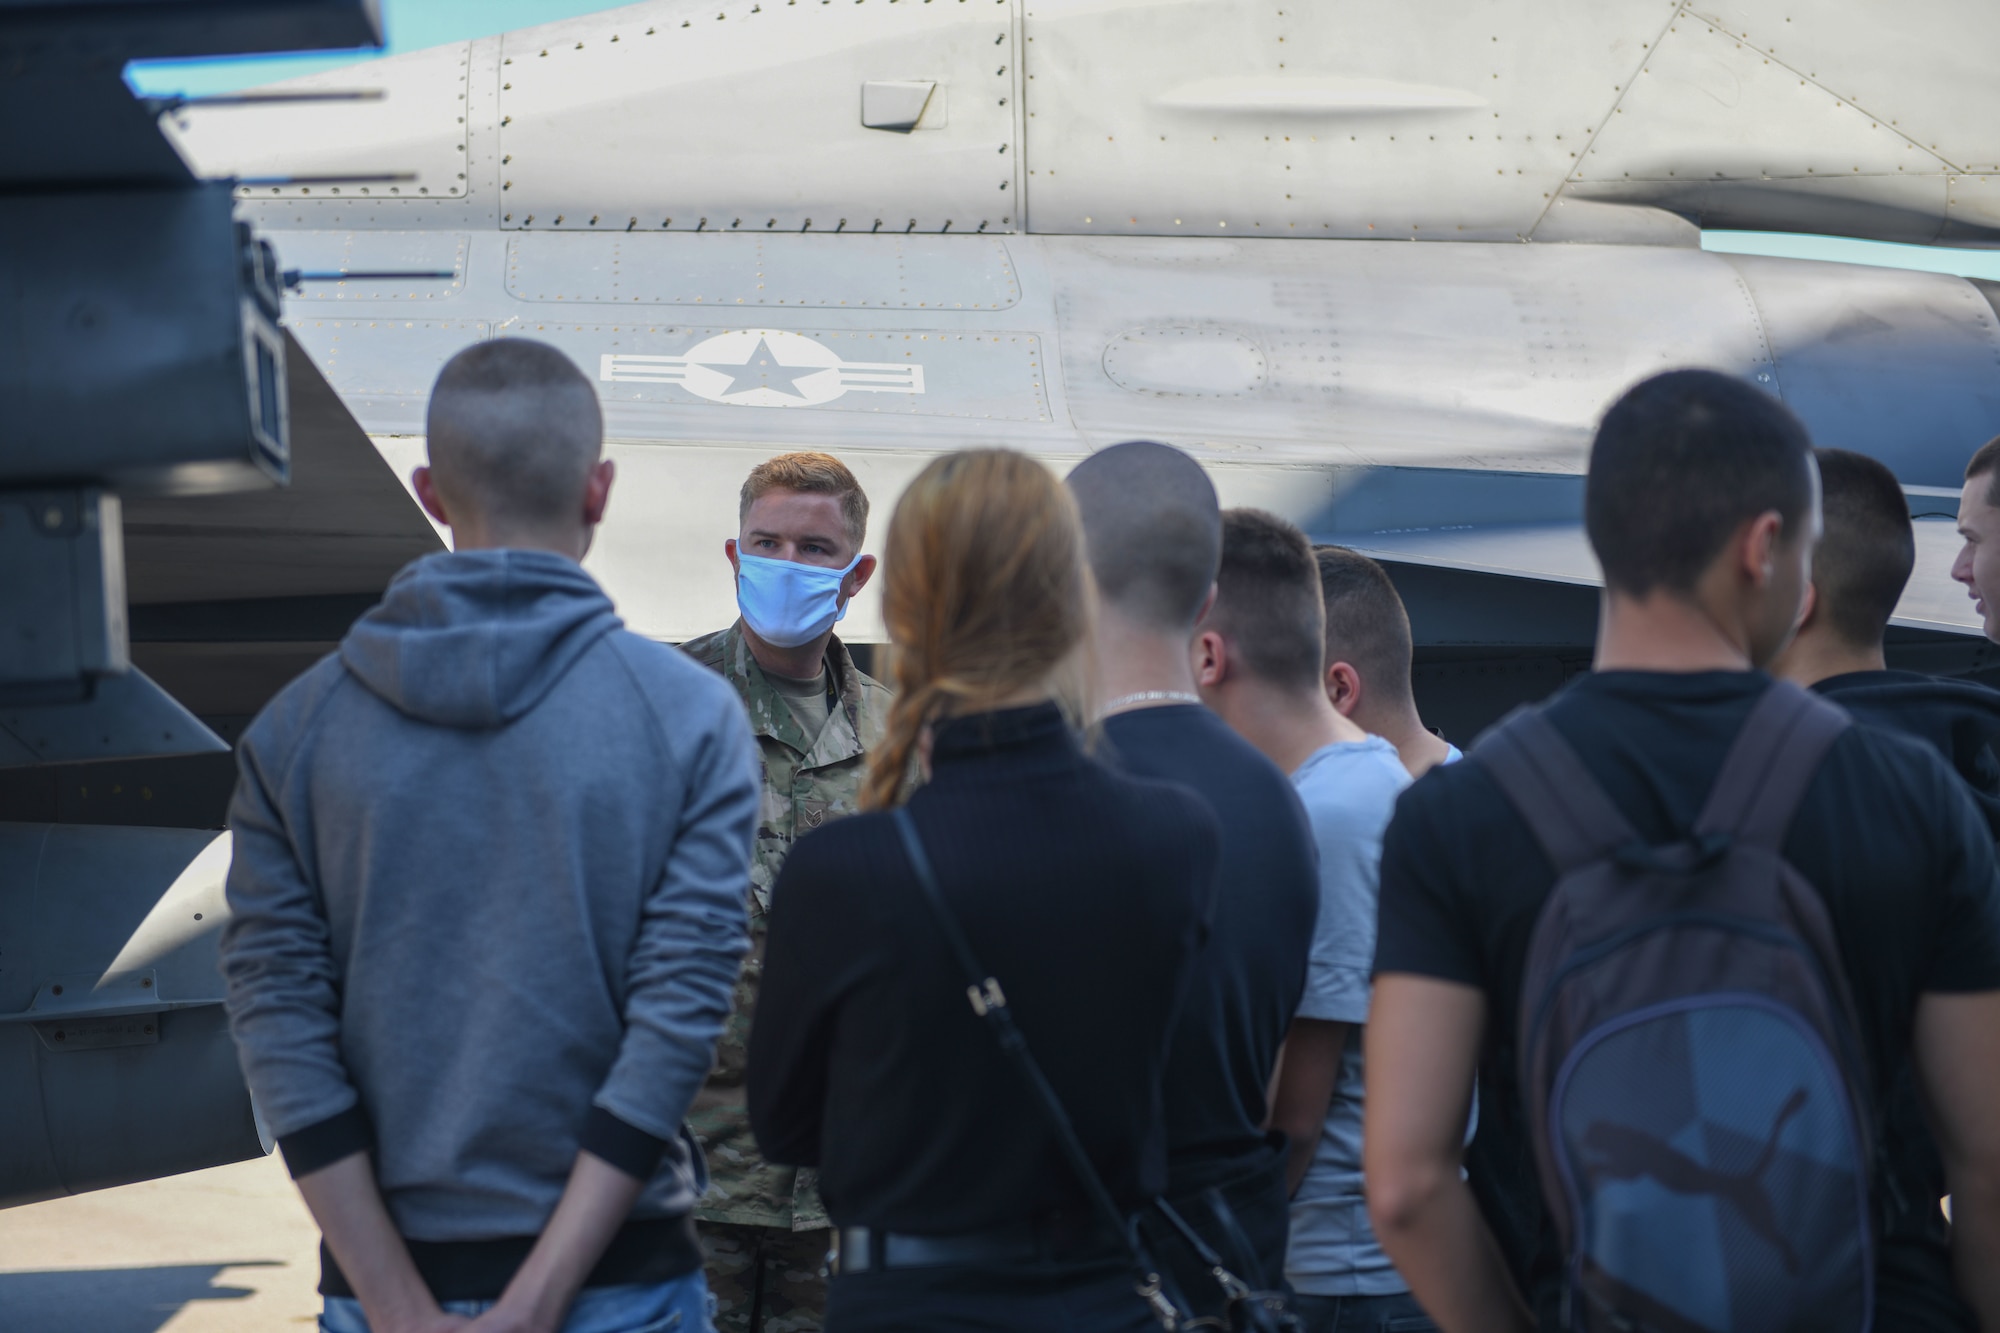 U.S. Air Force Staff Sgt. Richard Rygiel, 31st Aircraft Maintenance Squadron crew chief, speaks to students from First English Language School, Sofia, Bulgaria, during NATO enhanced Air Policing Oct. 2, 2020, at Graf Ignatievo Air Base, Bulgaria. The First English Language School was founded in 1958 as a high school for education in English language. During their visit, the students learned about various parts of a U.S. Air Force F-16 Fighting Falcon, and had the opportunity to sit in the cockpit of the aircraft. (U.S. Air Force photo by Airman 1st Class Ericka A. Woolever)